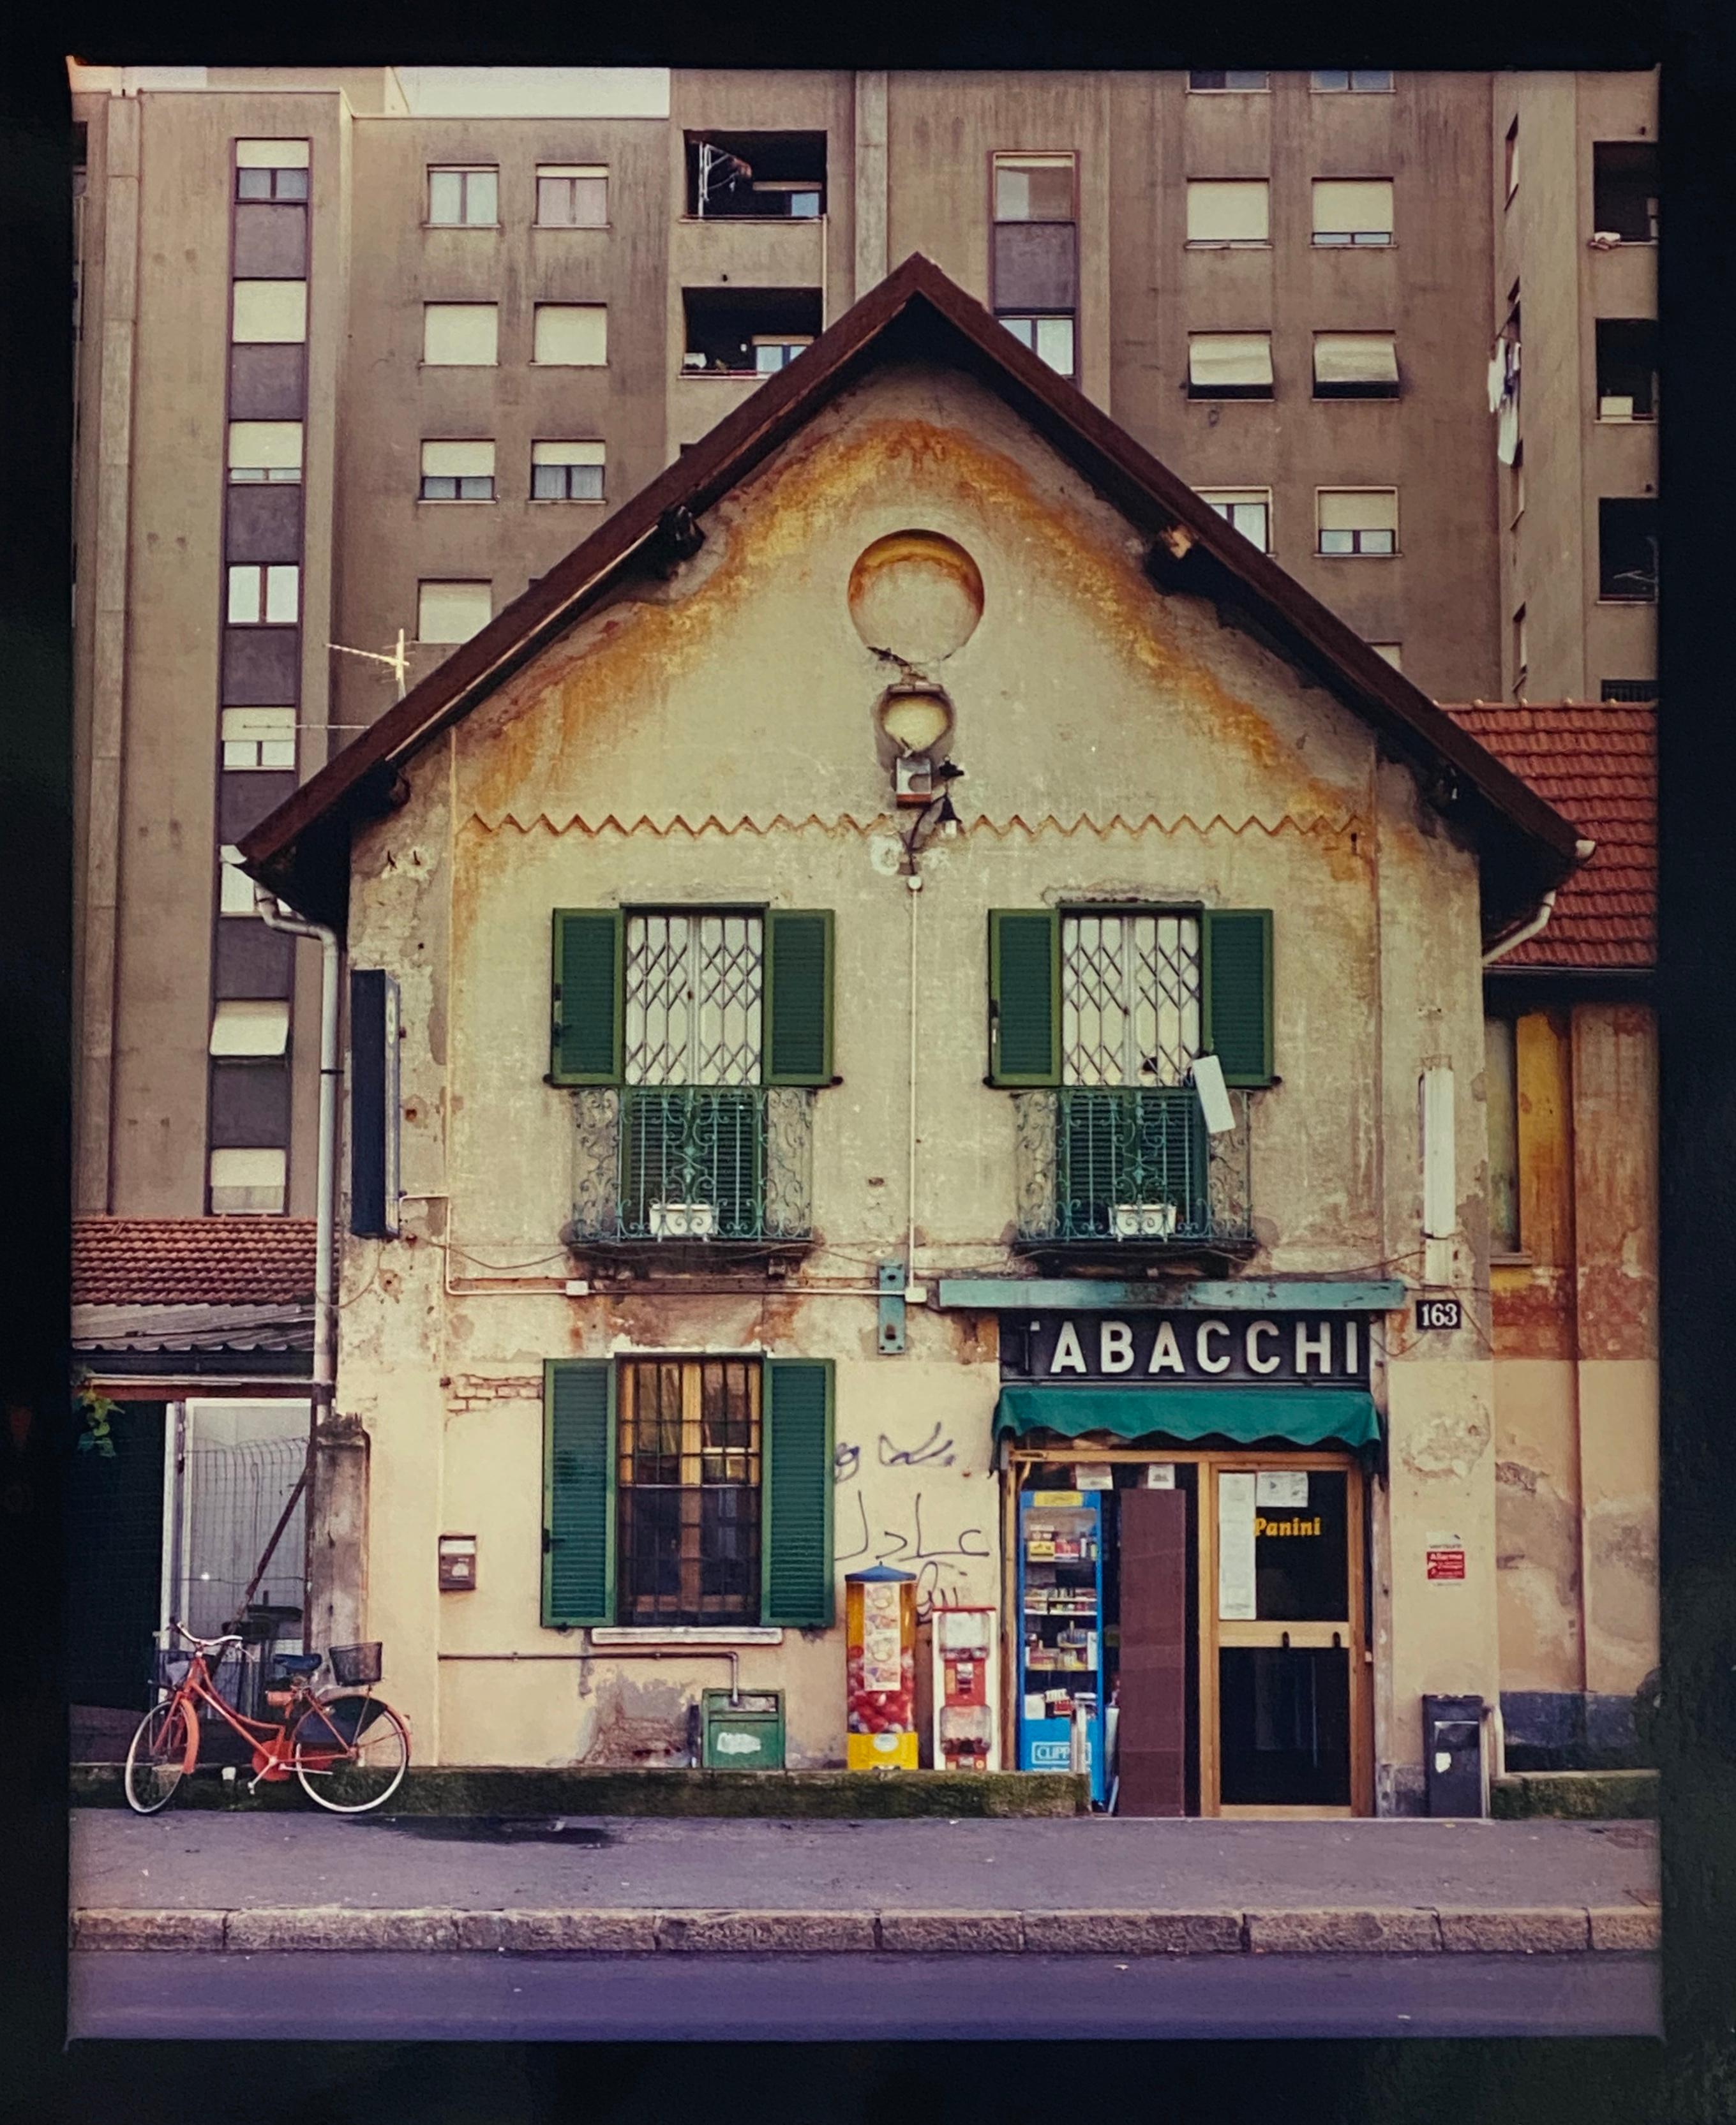 TABACCHI at Day, one of a sequence of photographs from Richard Heeps series, 'A Short History of Milan' which began in November 2018 for a special project featuring at the Affordable Art Fair Milan 2019 and the series is ongoing.

There is a